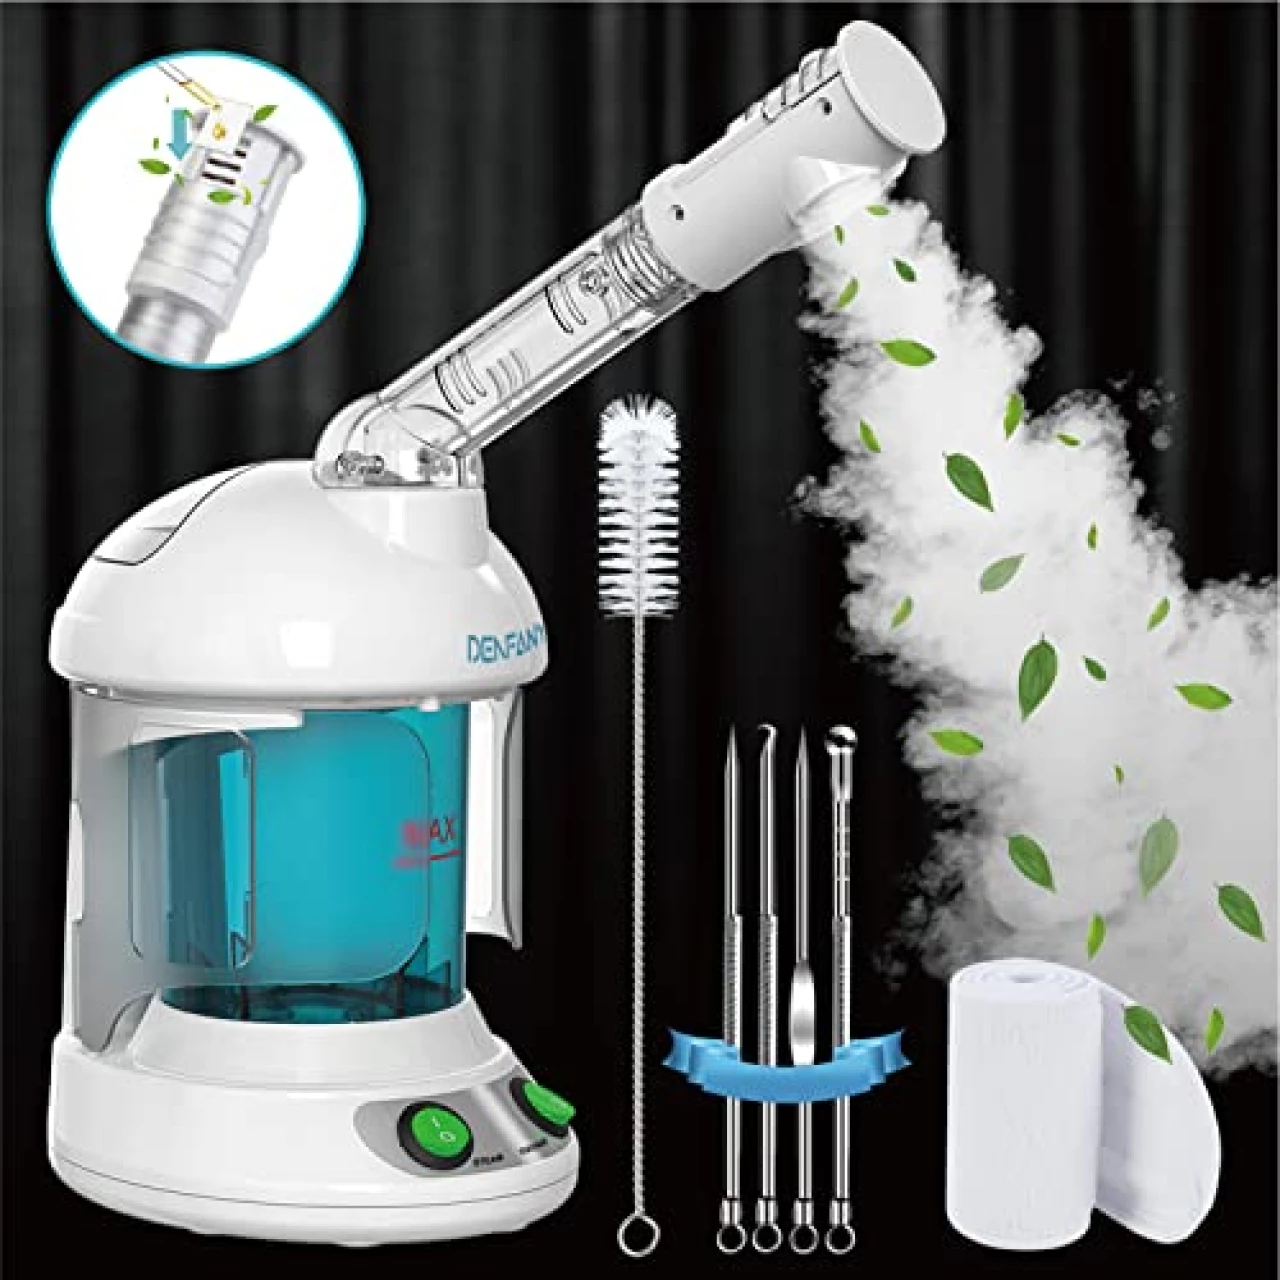 Nano Ionic Facial Steamer with 360° Rotating Nozzle, Portable Facial Steamer for Personal Care Use at Home or Salon Bonus 1 Piece Spa Headband 4 Piece Stainless Steel Skin Kit